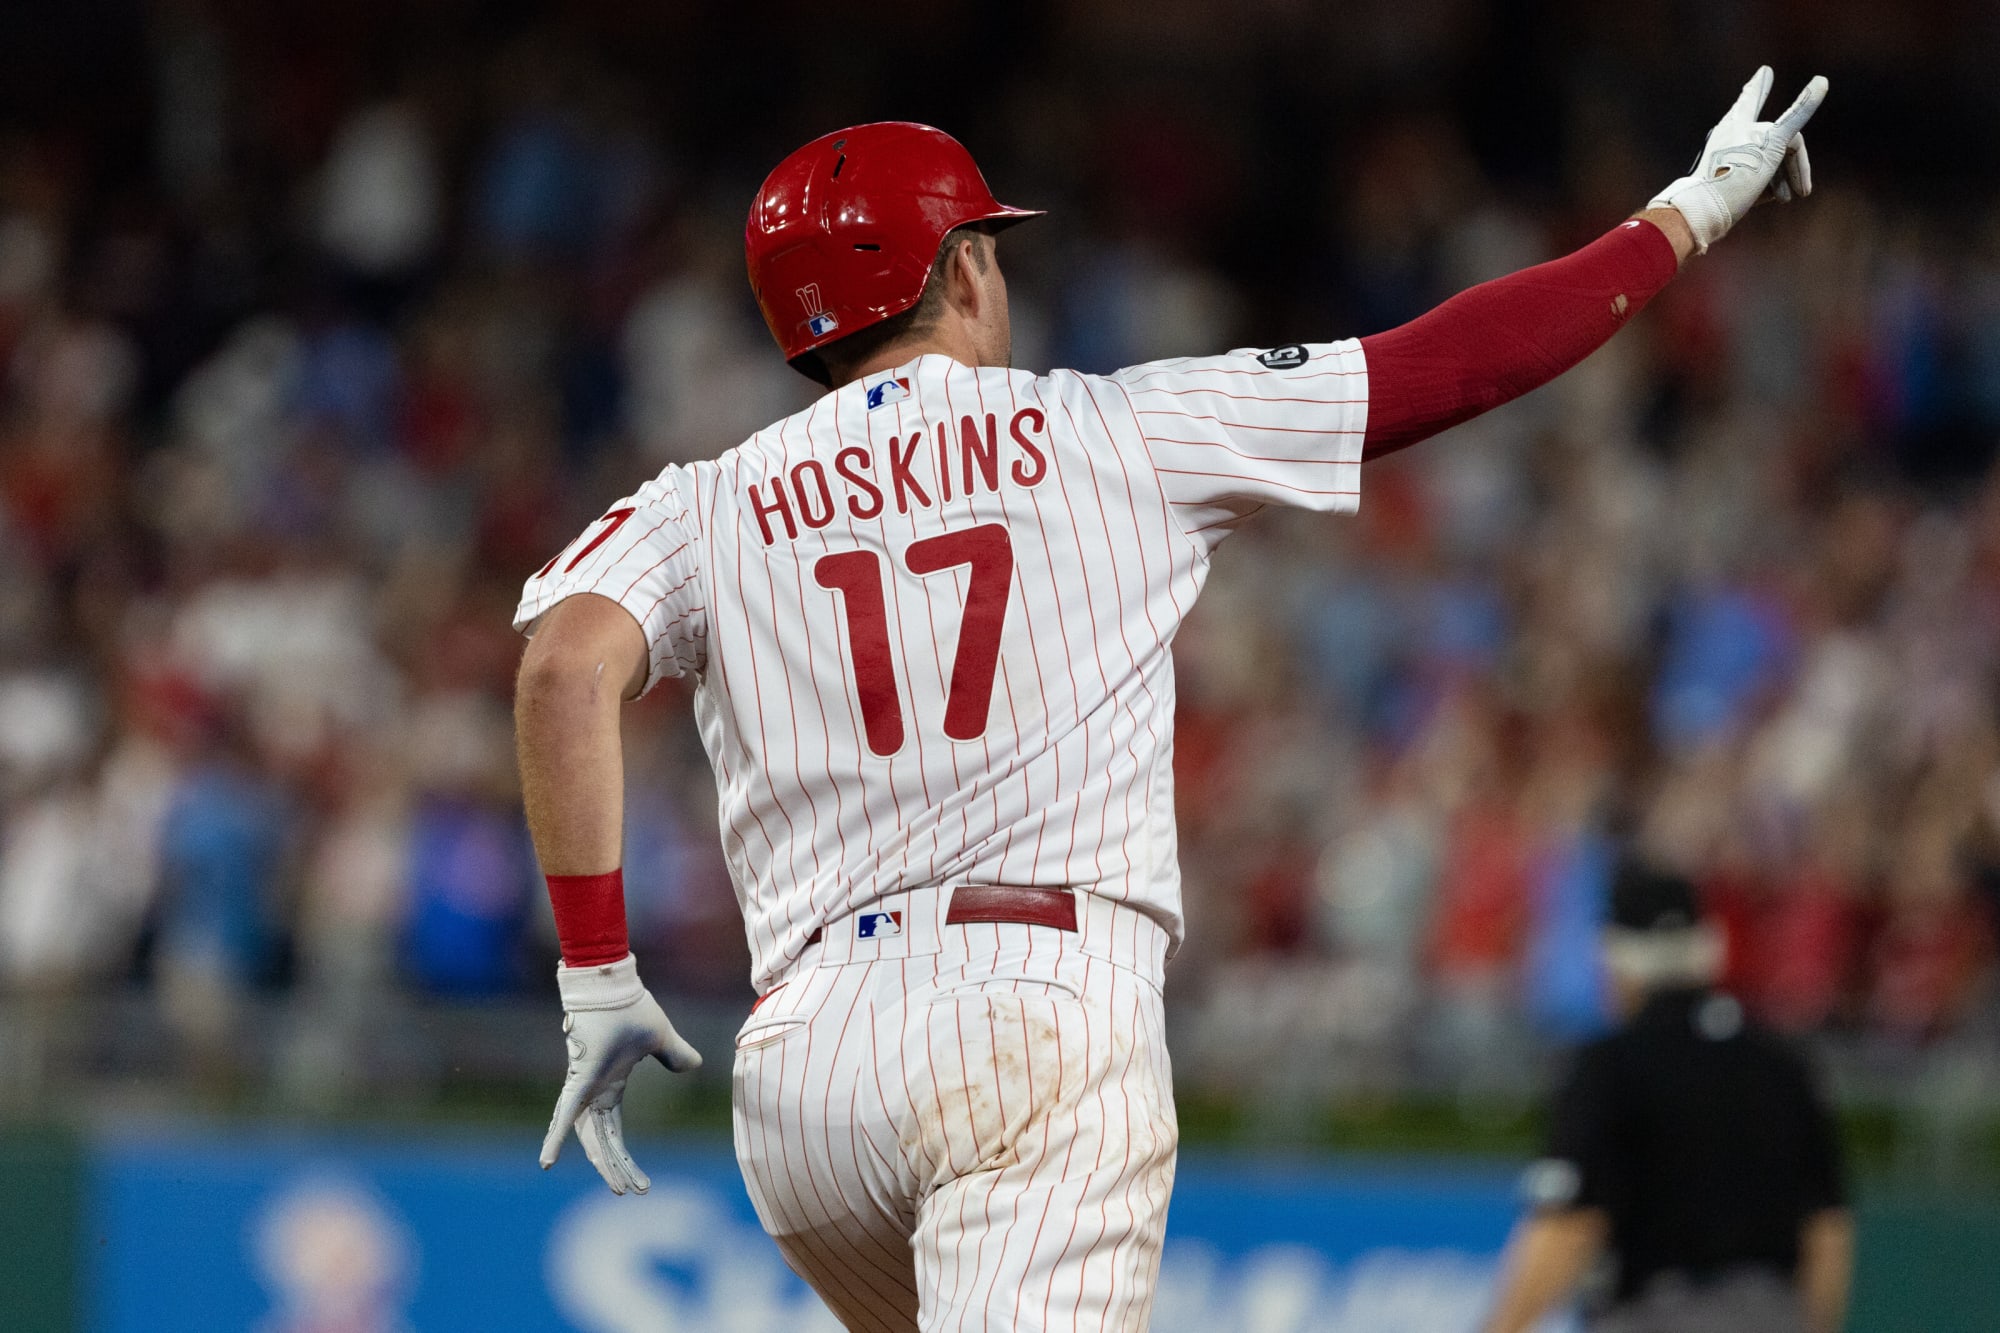 Philadelphia Phillies: Should Rhys Hoskins Stay? Or is it time to